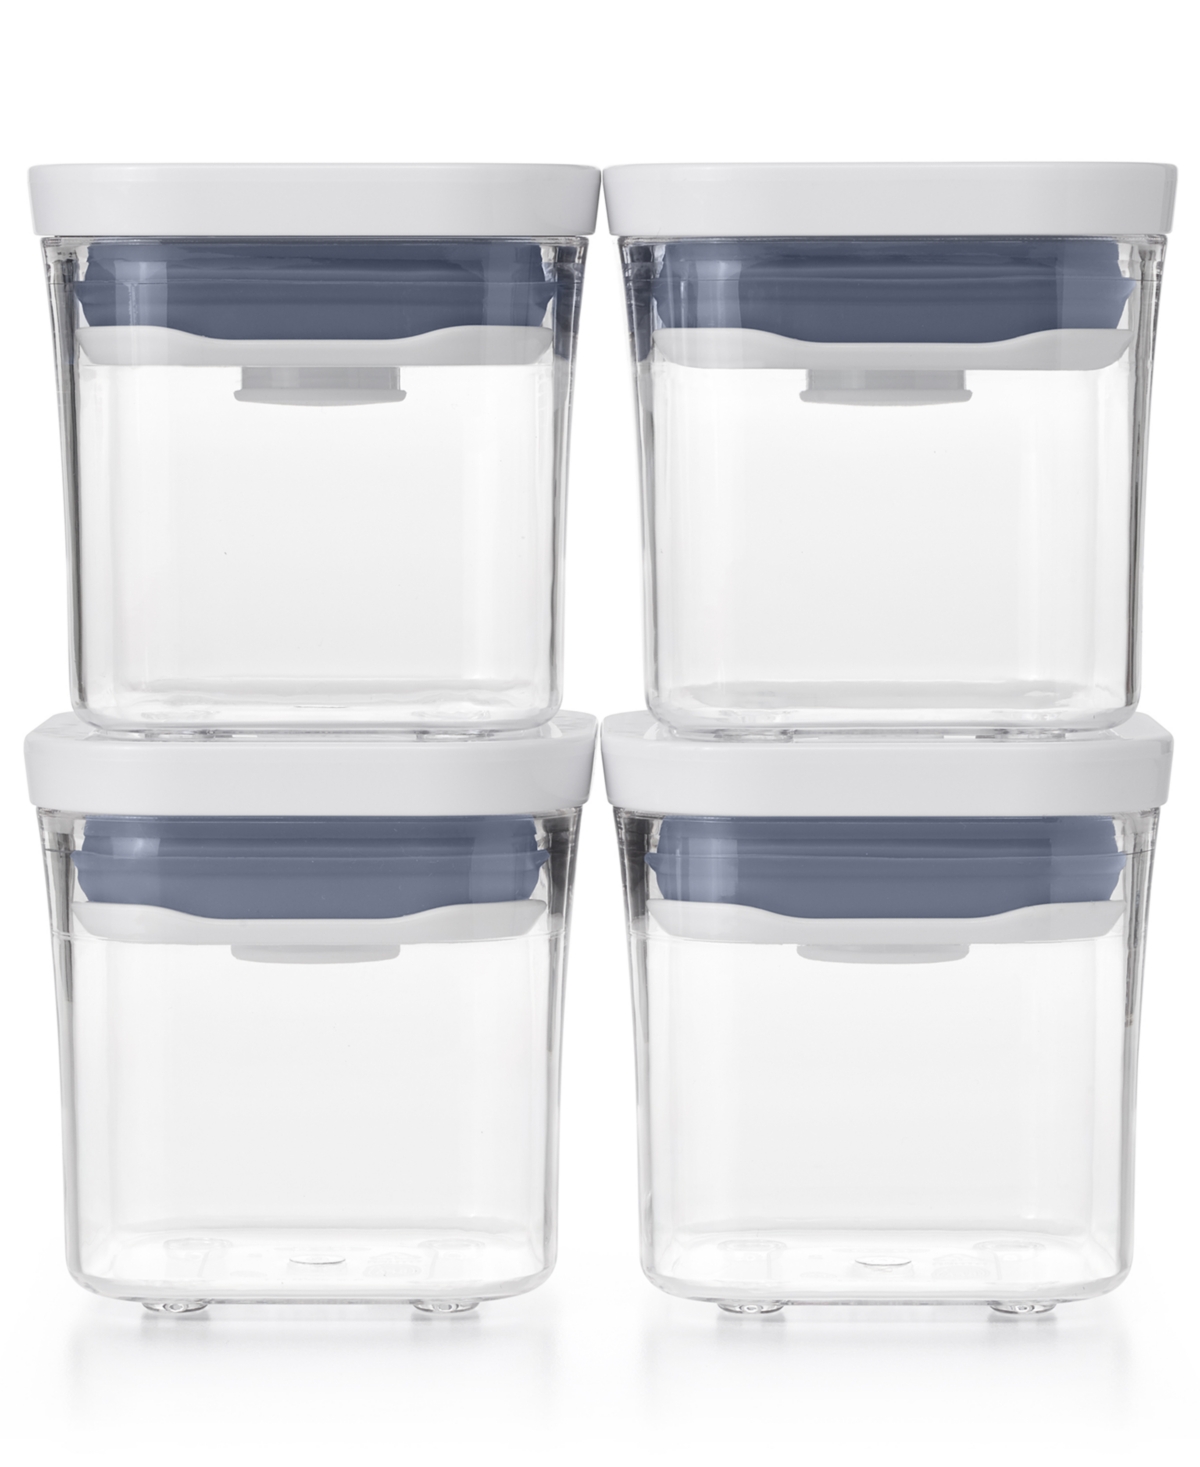 BPA-Free Plastic Food Saver-Kitchen Food Cereal Storage Containers with Graduated Cap Set of 3 Small